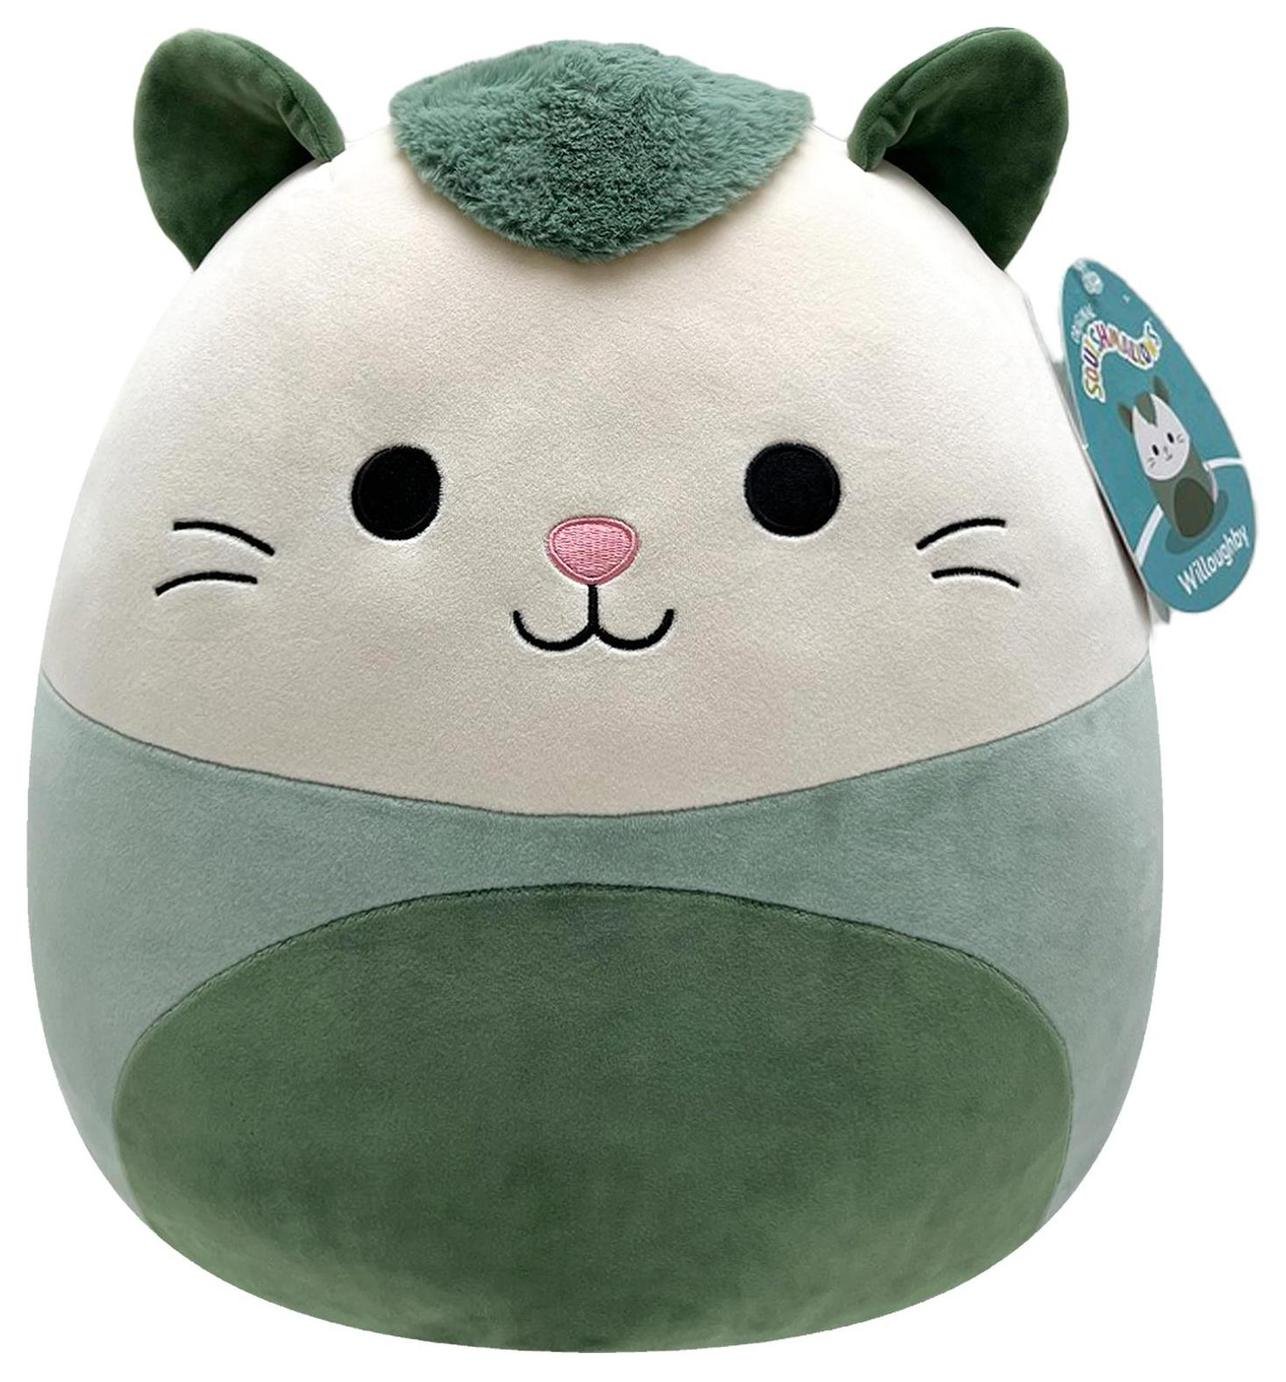 Original Squishmallows 16-inch - Willoughby The Green Poss